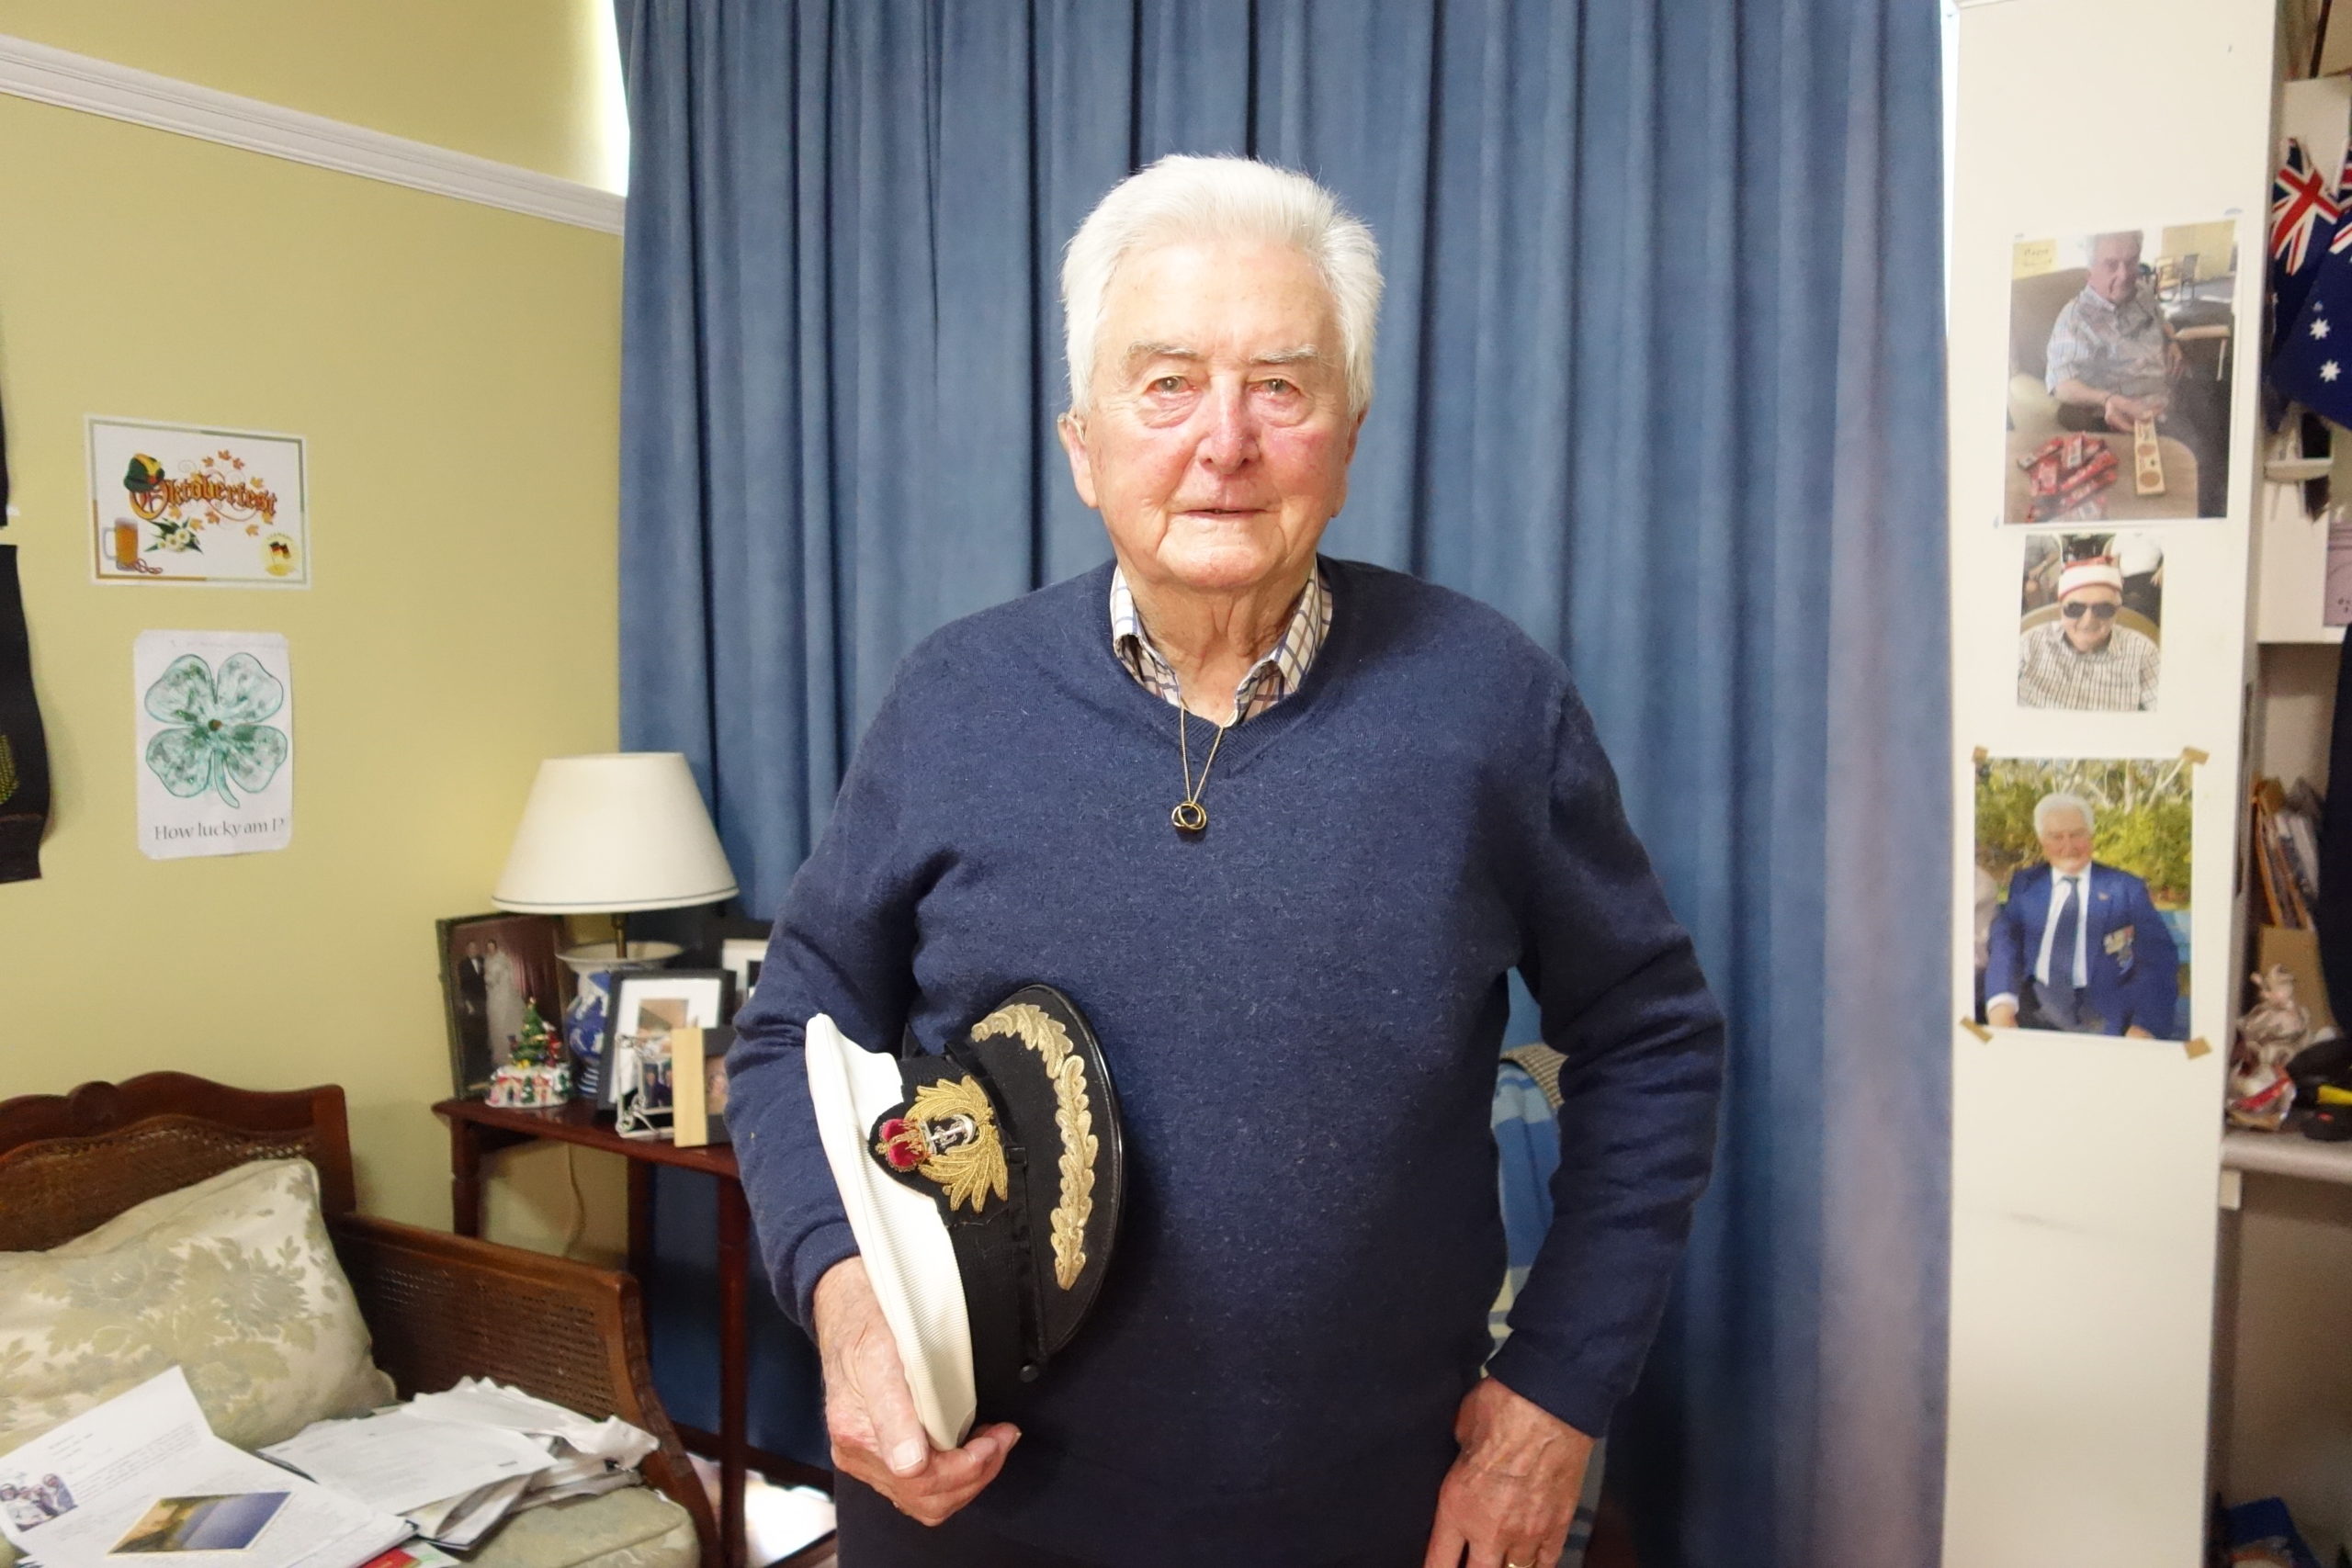 fred_lewis_now-scaled | RSL LifeCare - provide care and service to war veterans, retirement villages and accommodation, aged care services and assisted living